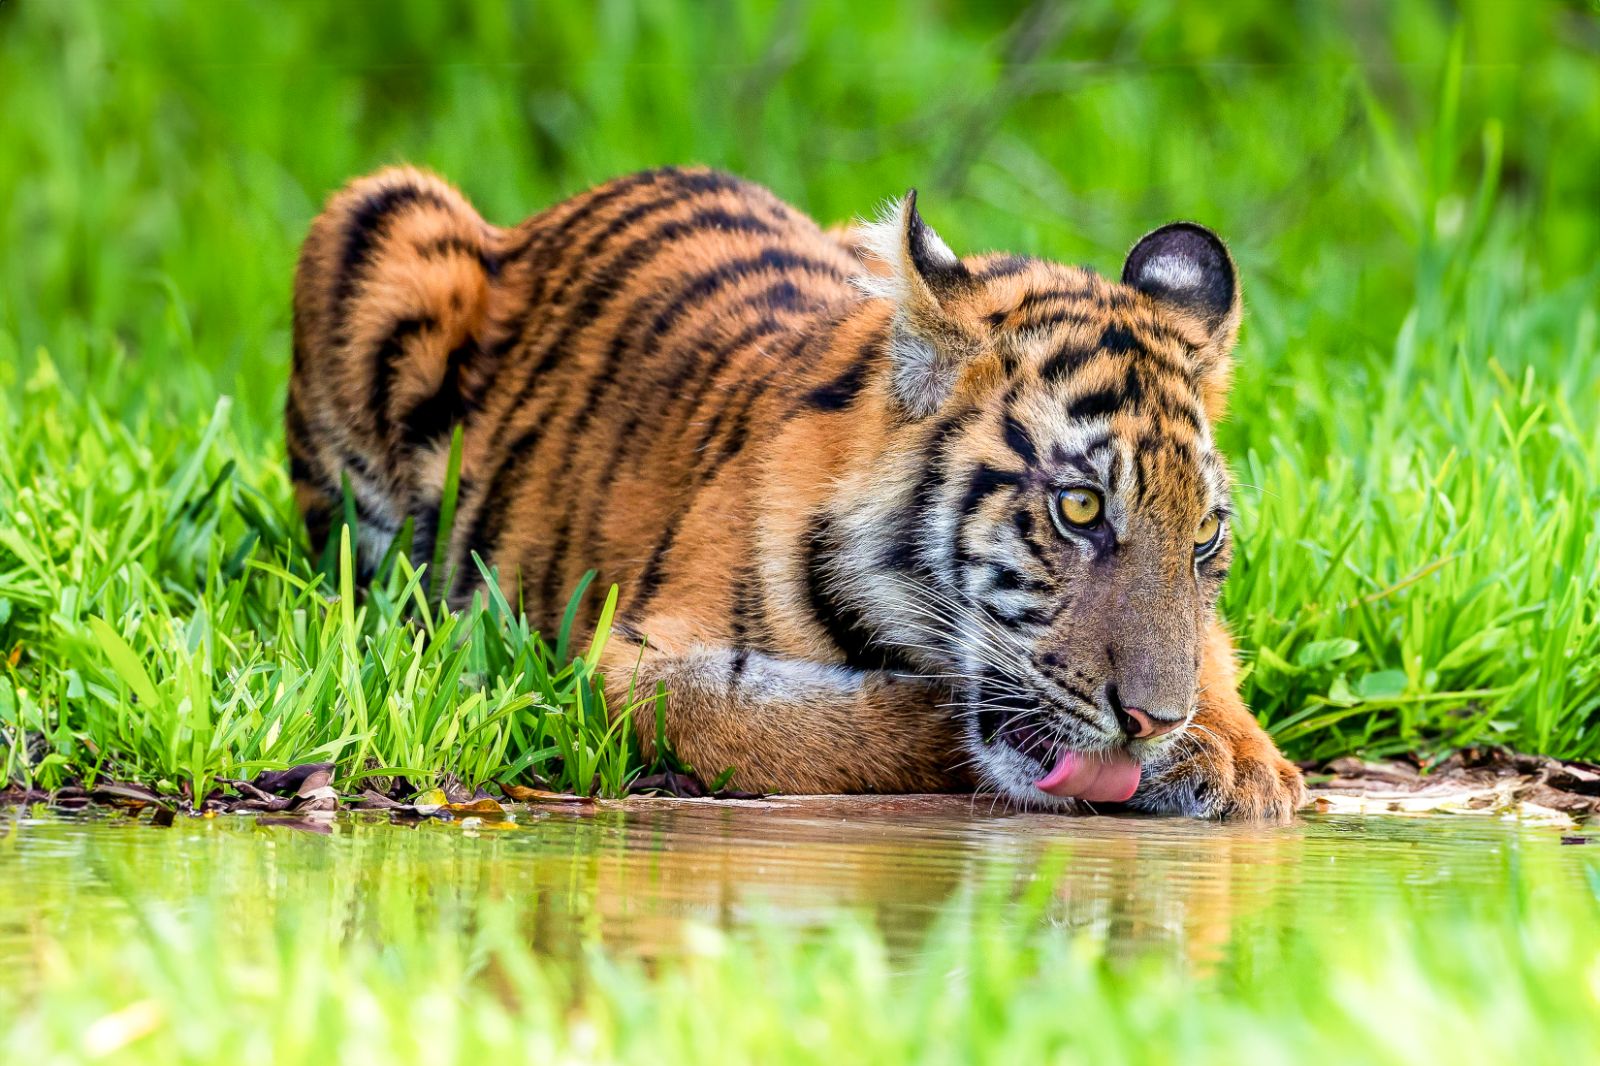 A Bengal tiger drinking from a river in the Chitwan National Park